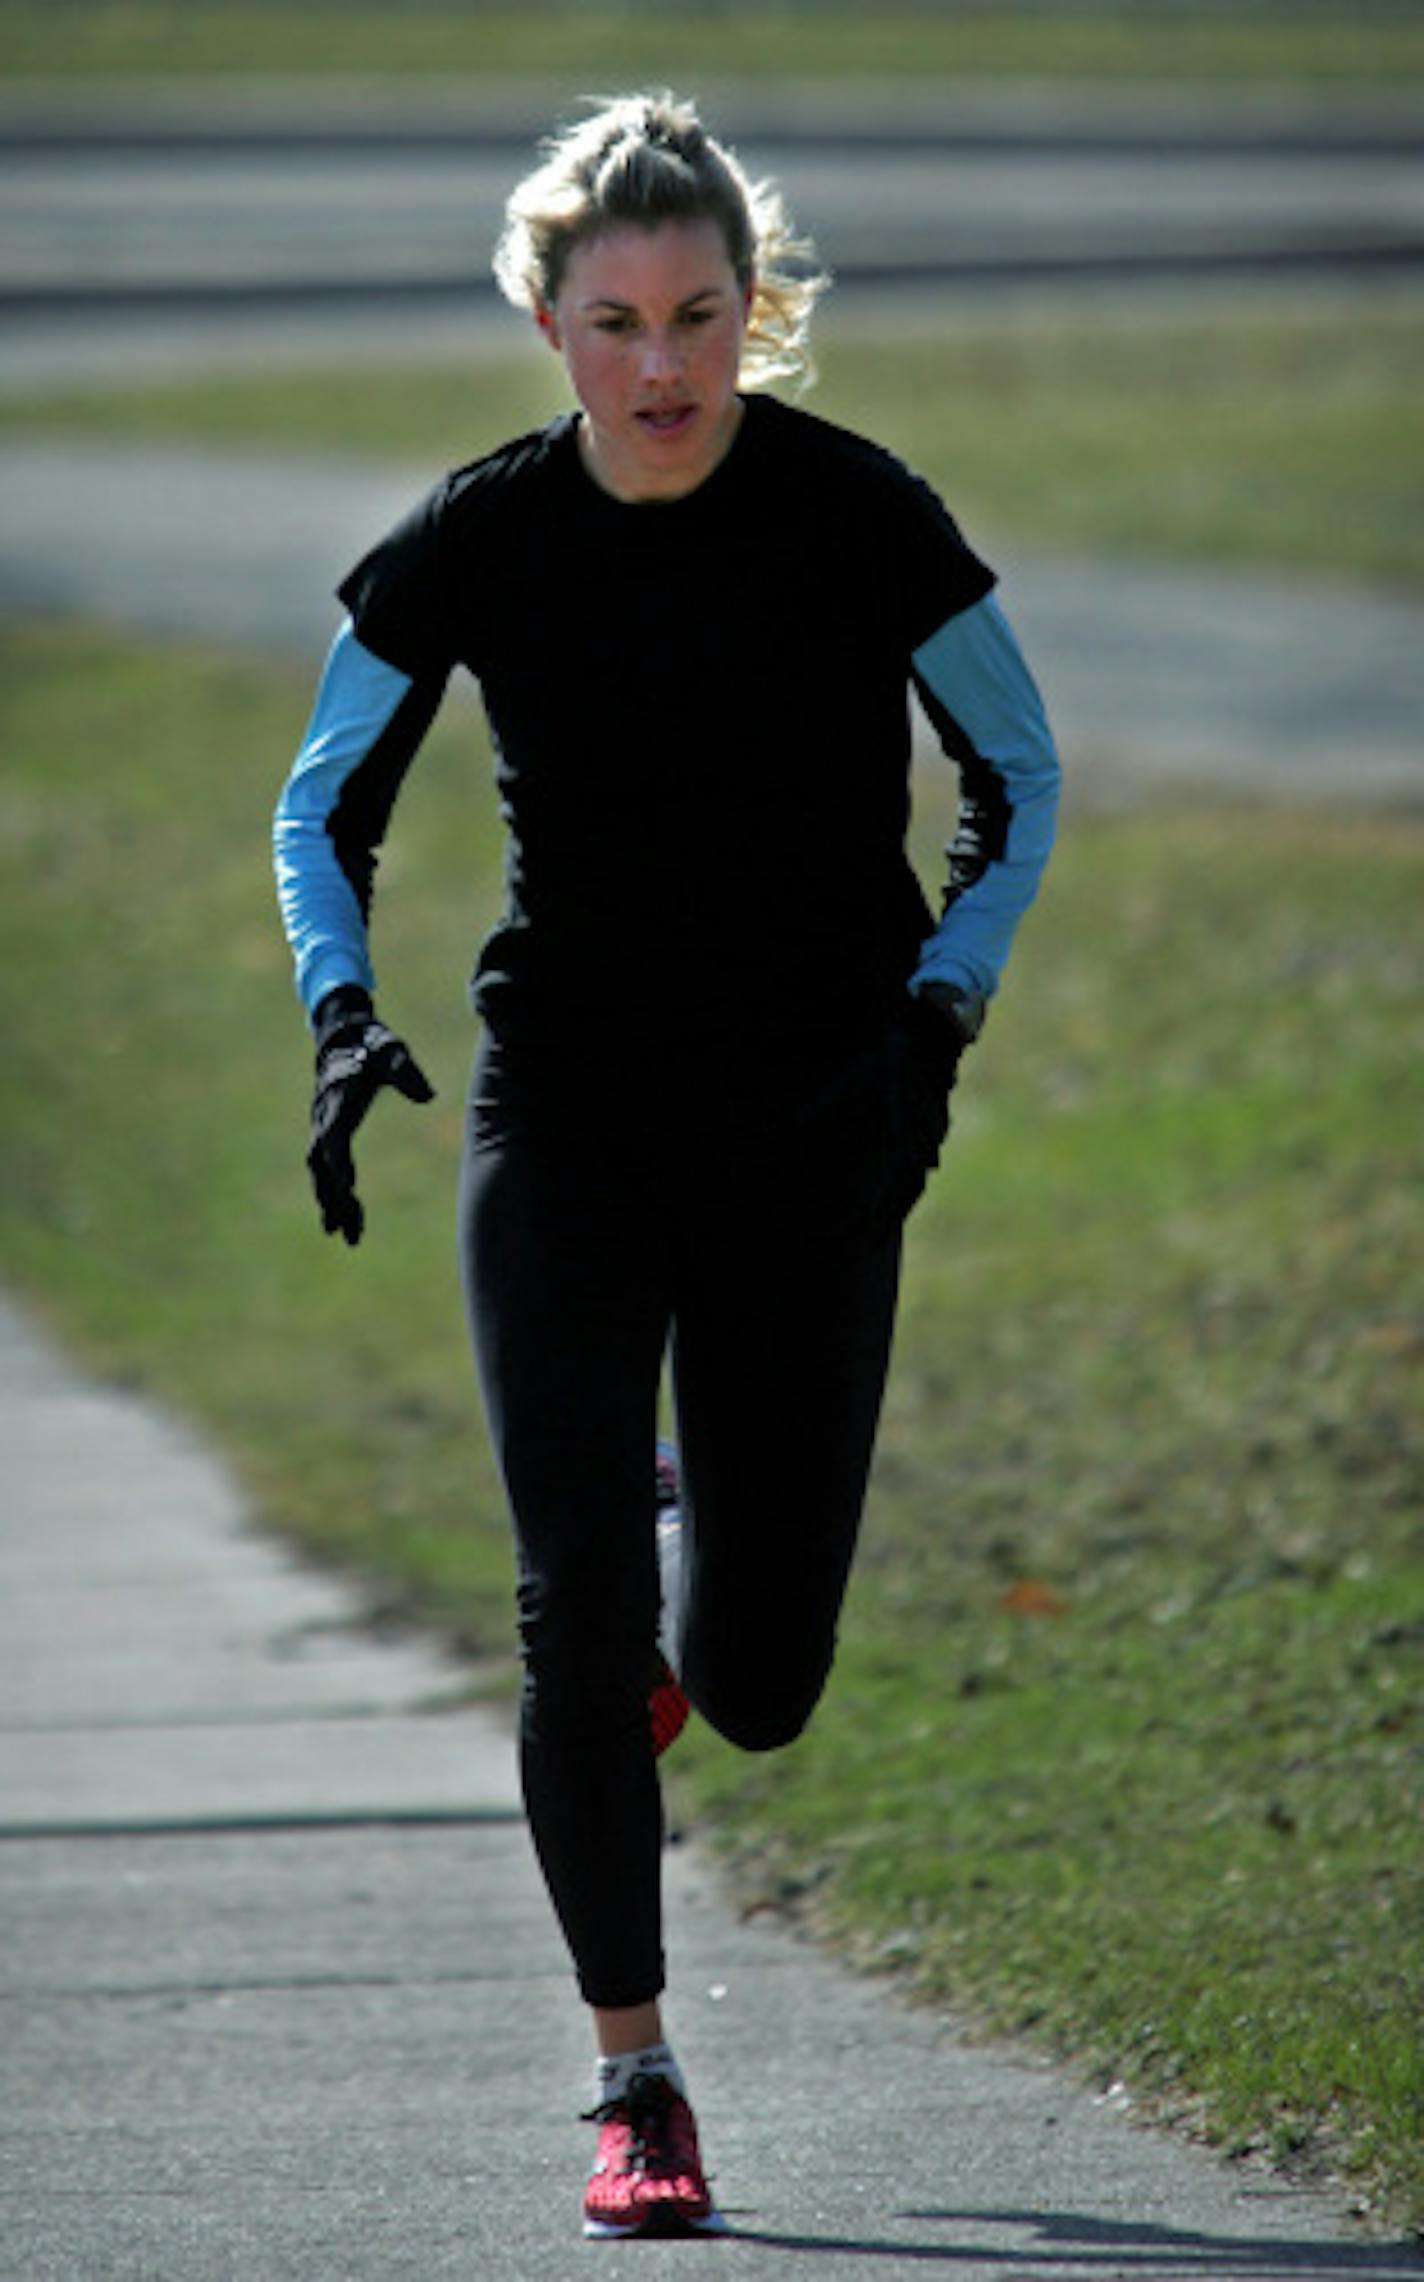 Michelle Lilienthal, a distance runner for Team USA Minnesota, ran along West River Road near the Franklin Avenue bridge during a morning workout. She will compete in the U.S. women's marathon Olympic trials in Boston on April 20.